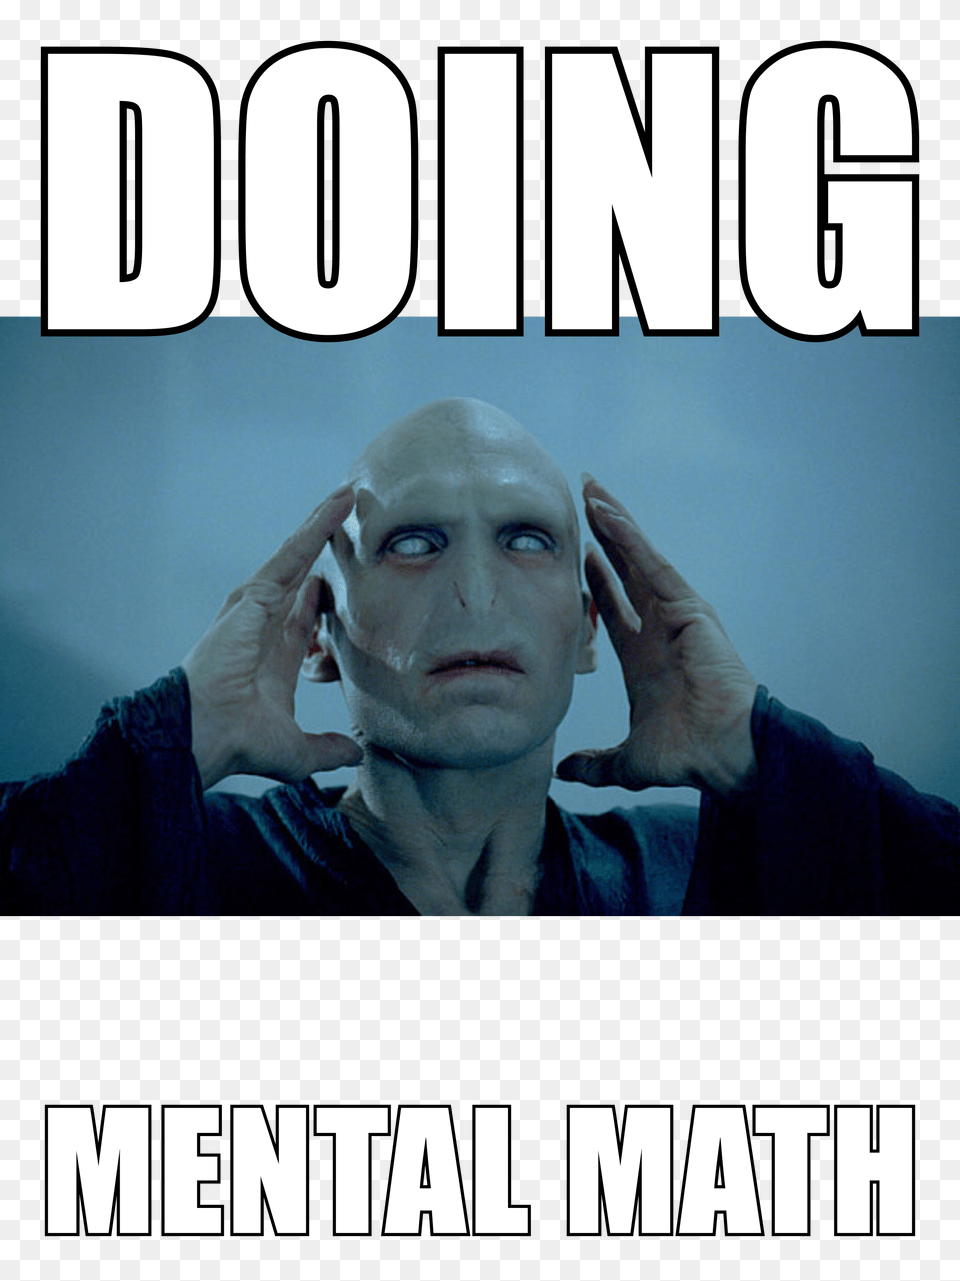 Voldemort Meme, Adult, Photography, Person, Man Png